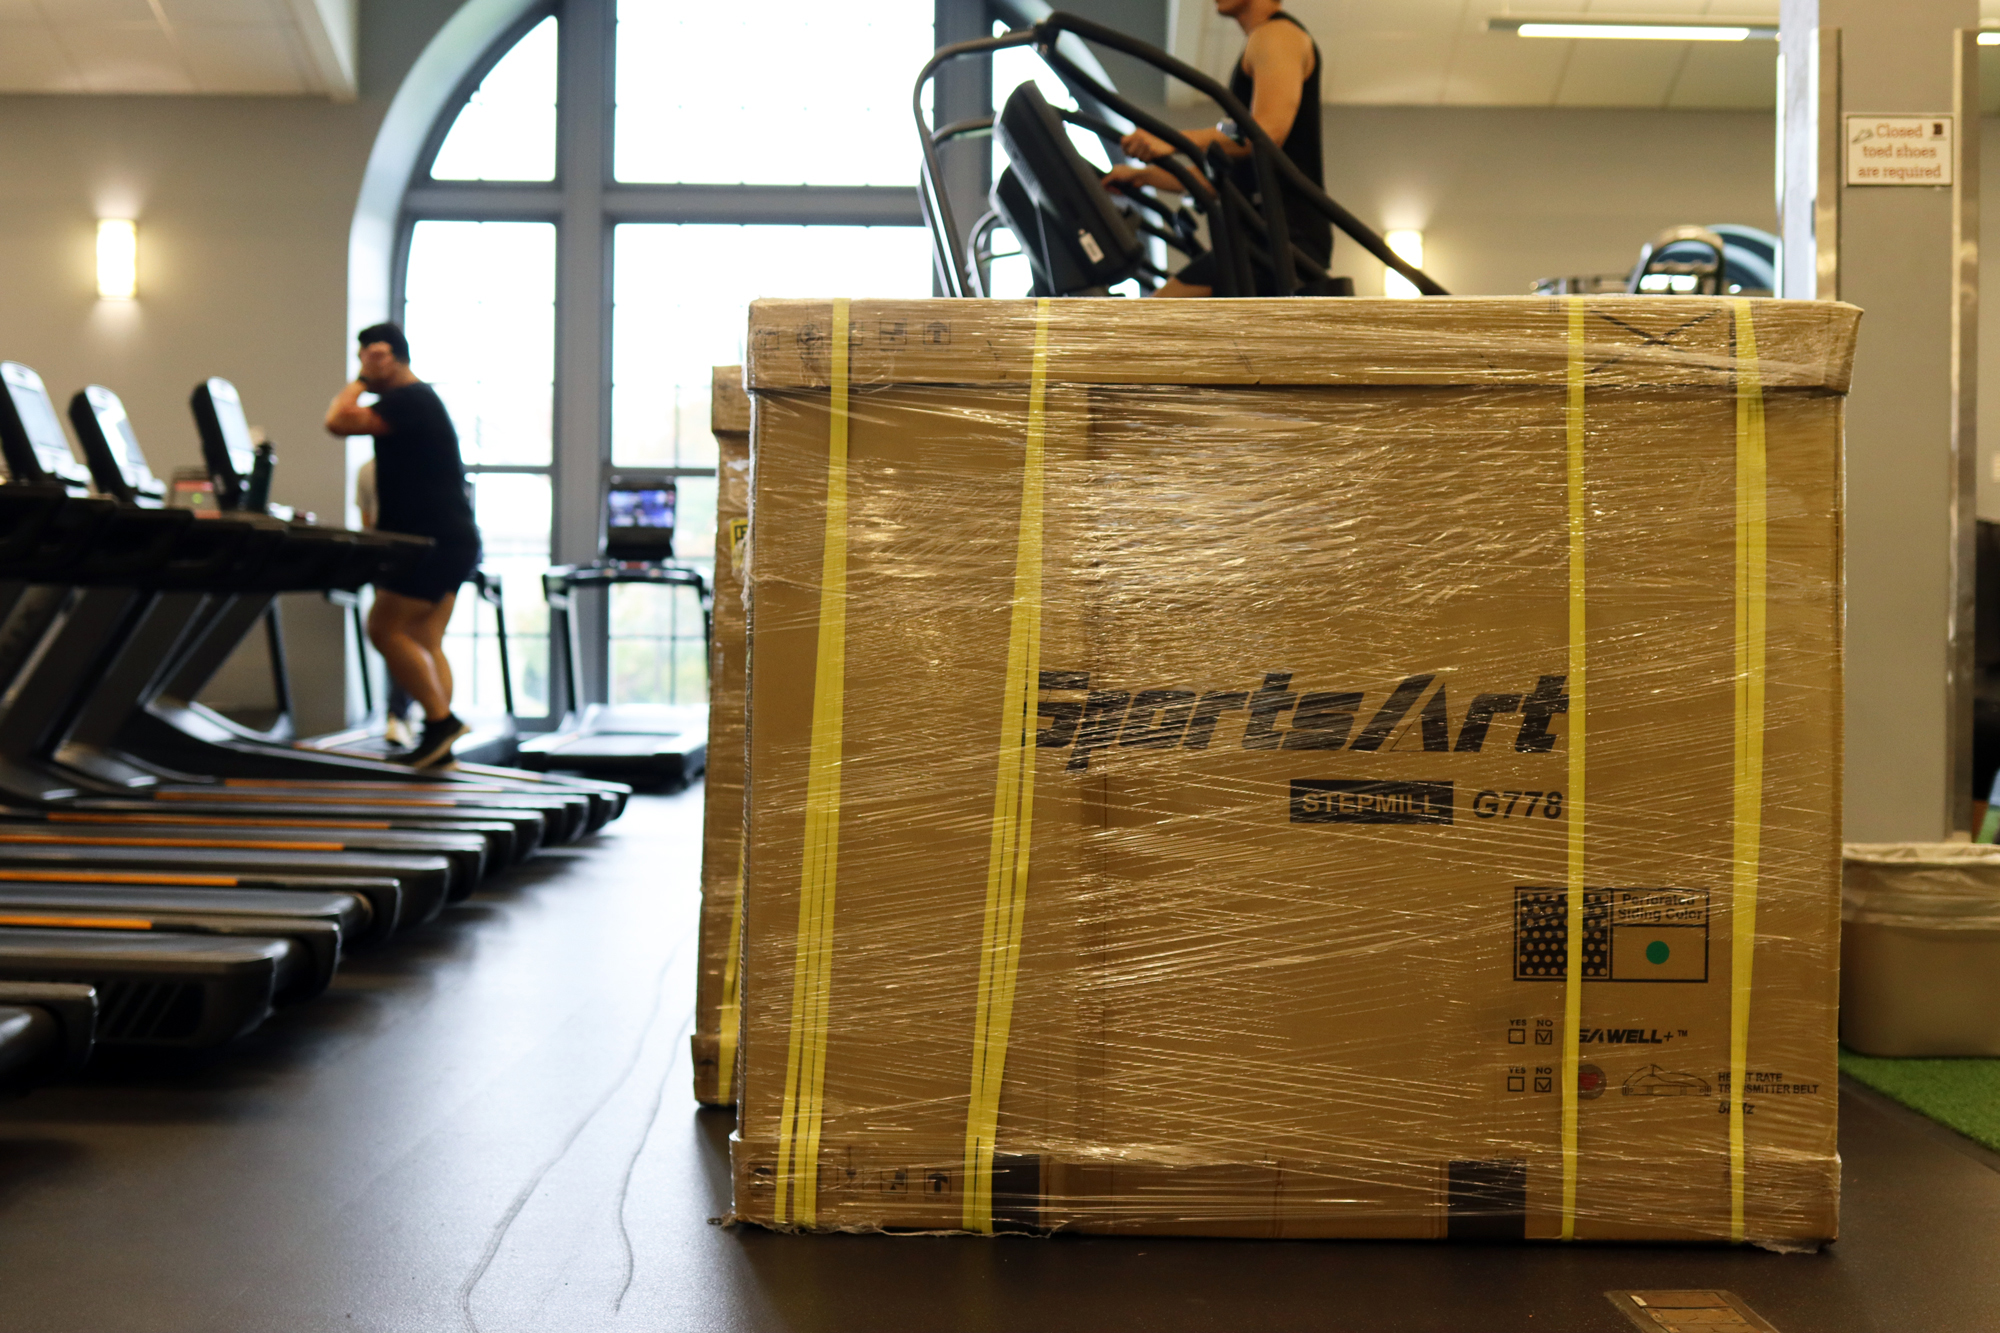 Box containing stepmill sits in the gym